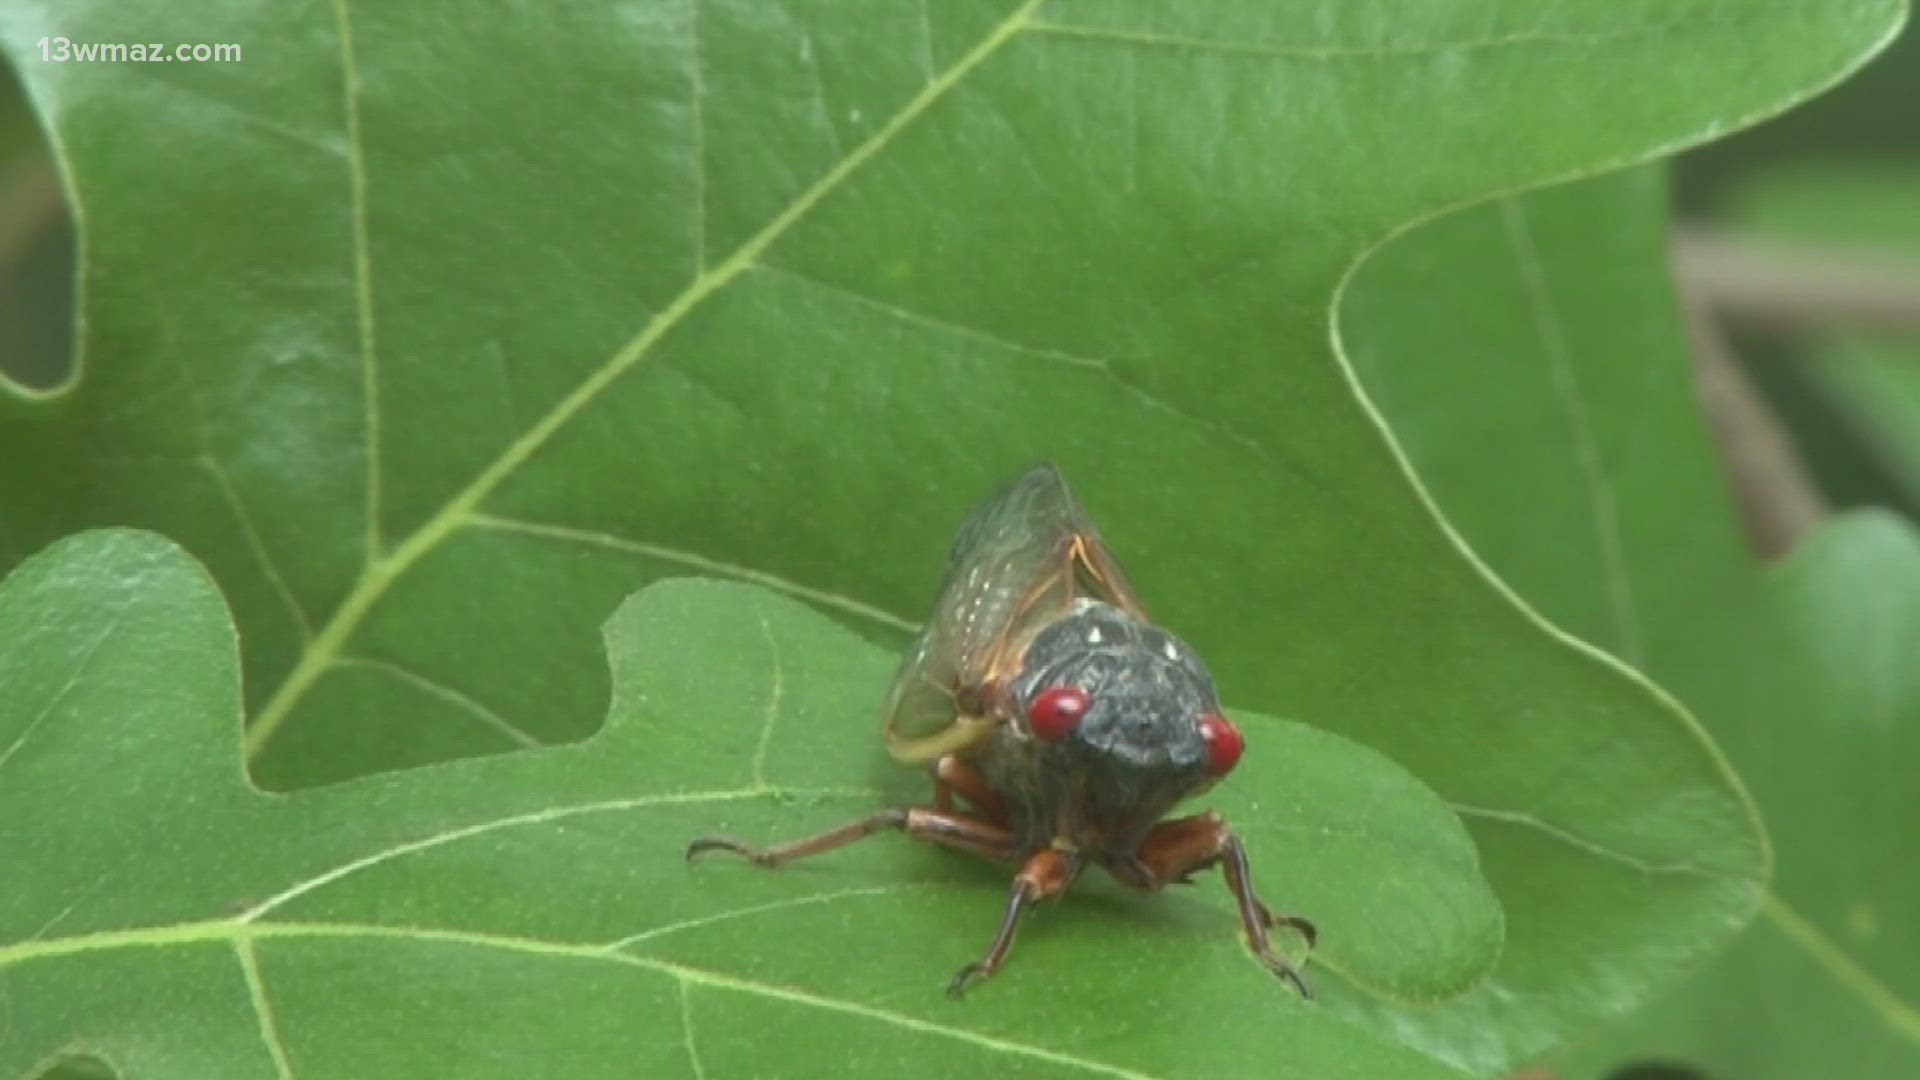 Dr. Bruce Snyder said the periodical cicadas came a little early this year.